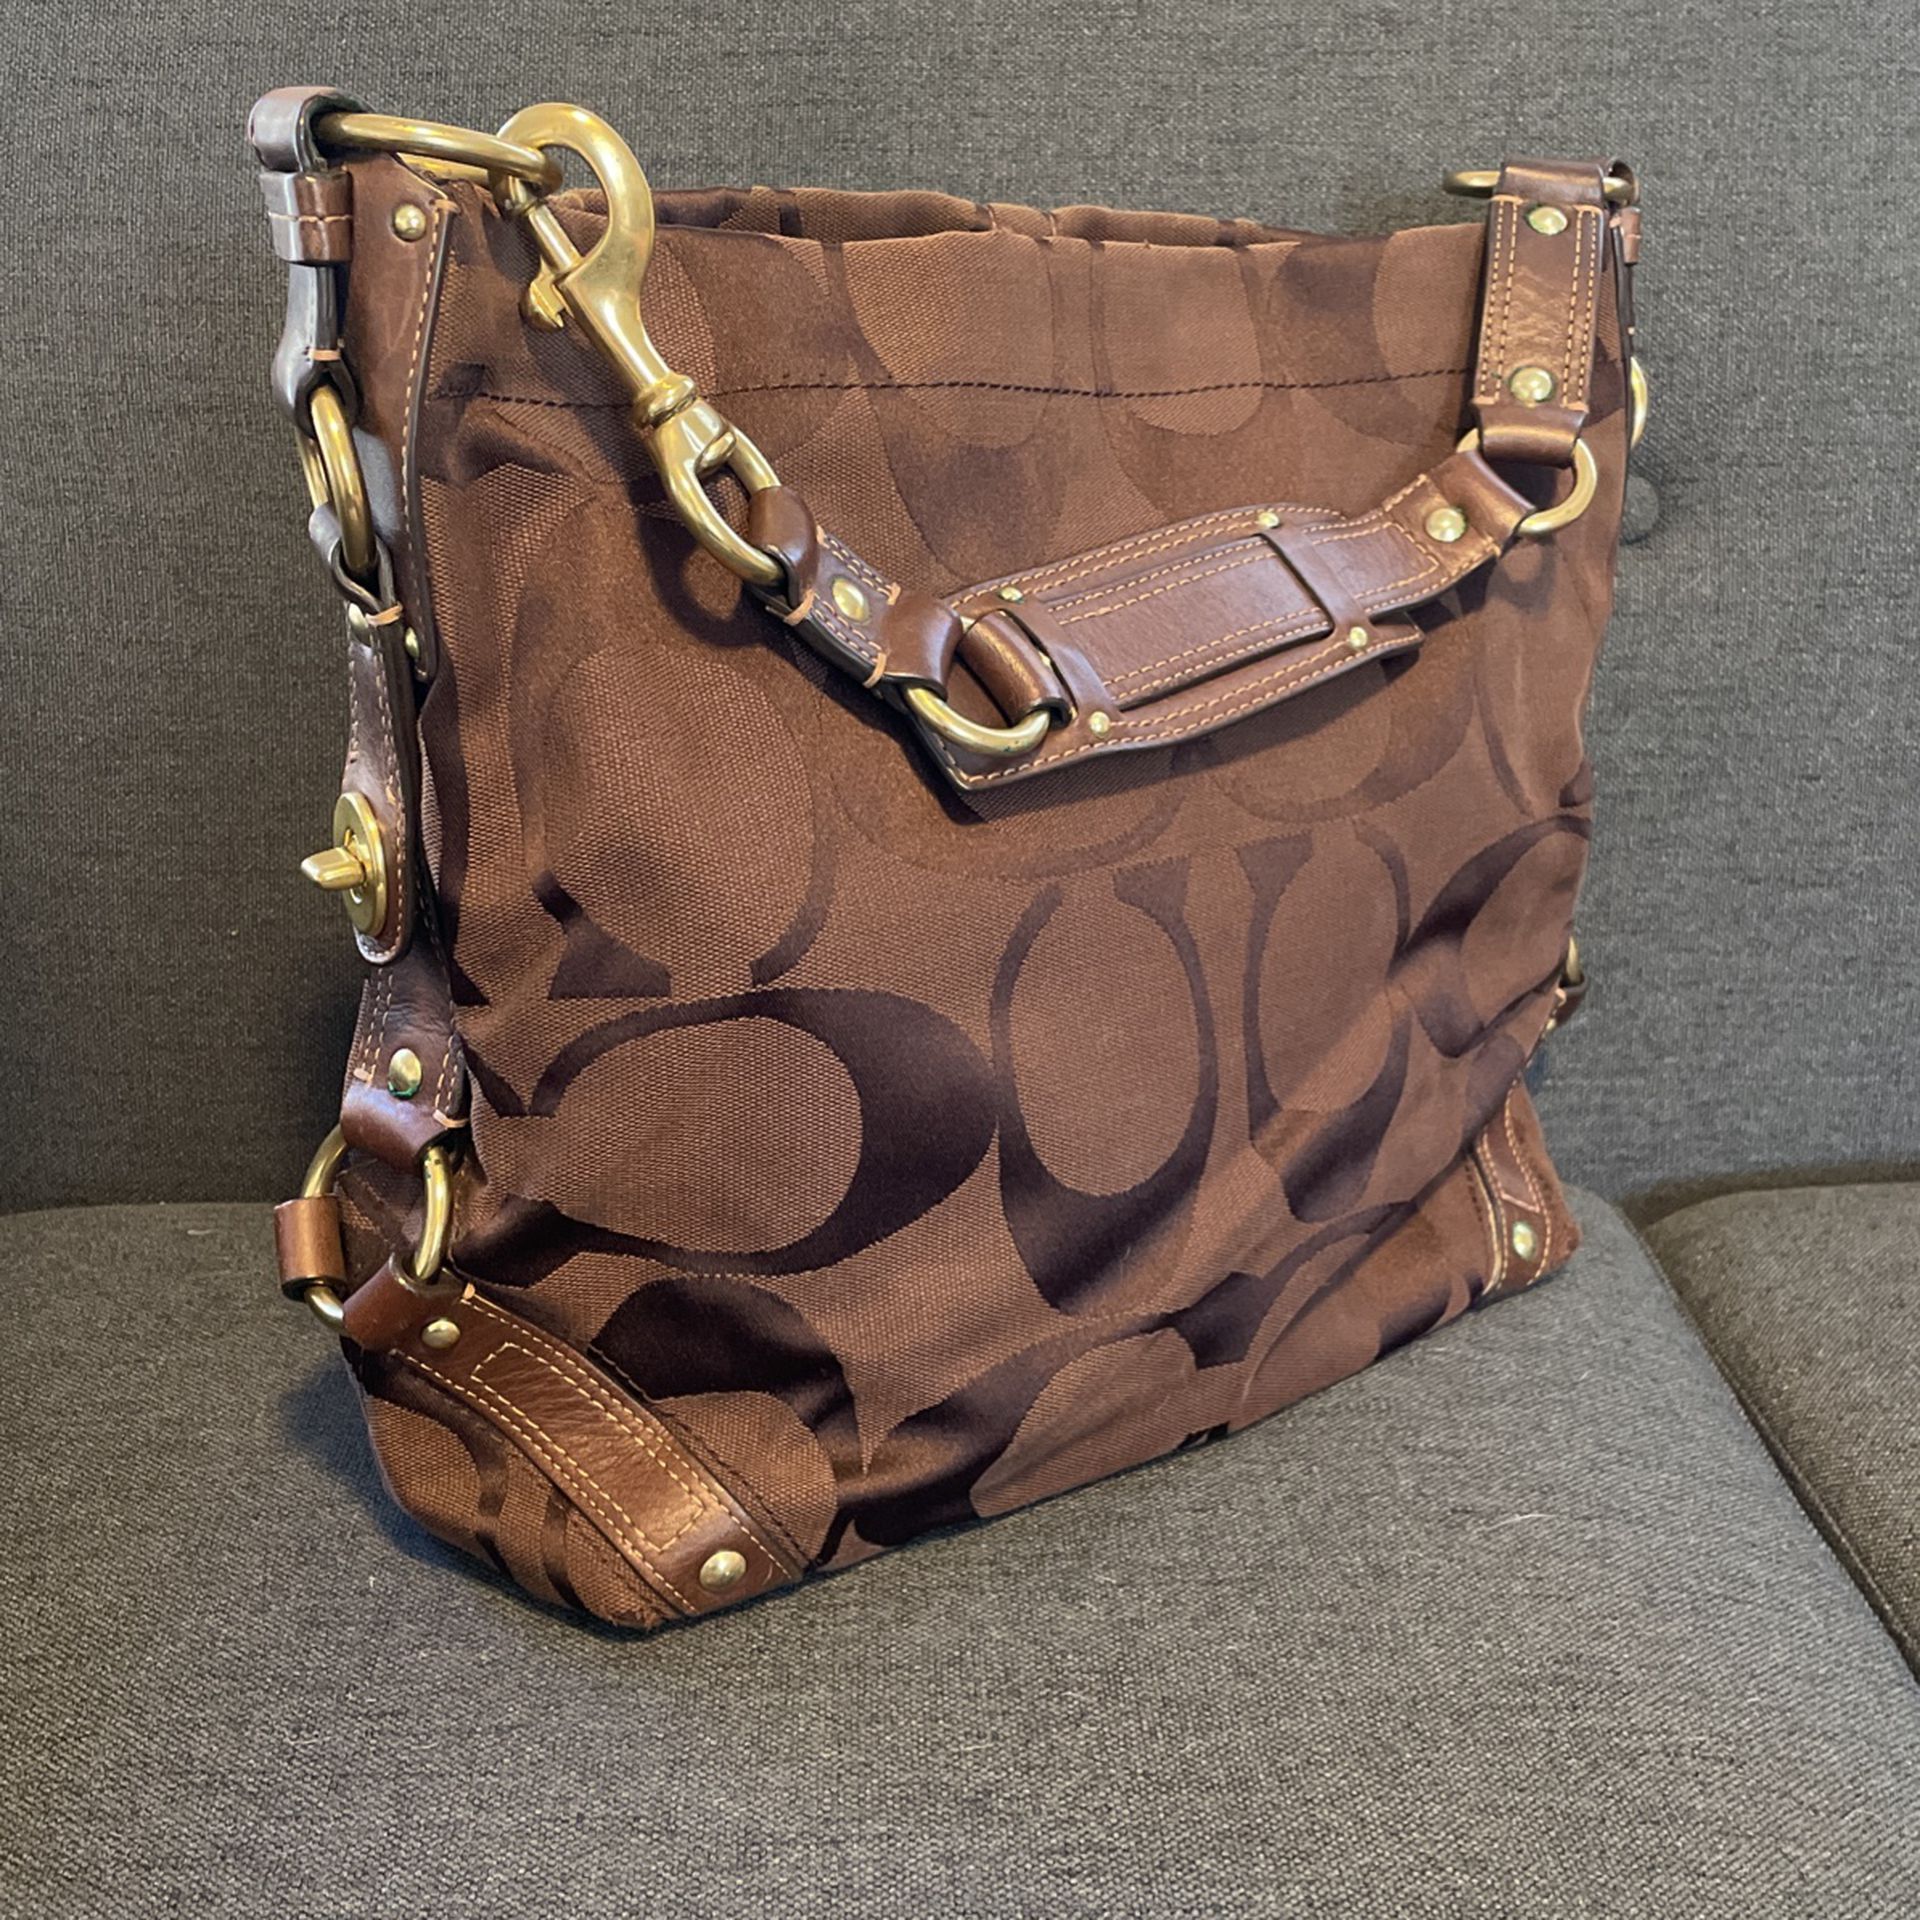 Coach Purse, Brown Color In great Condition!